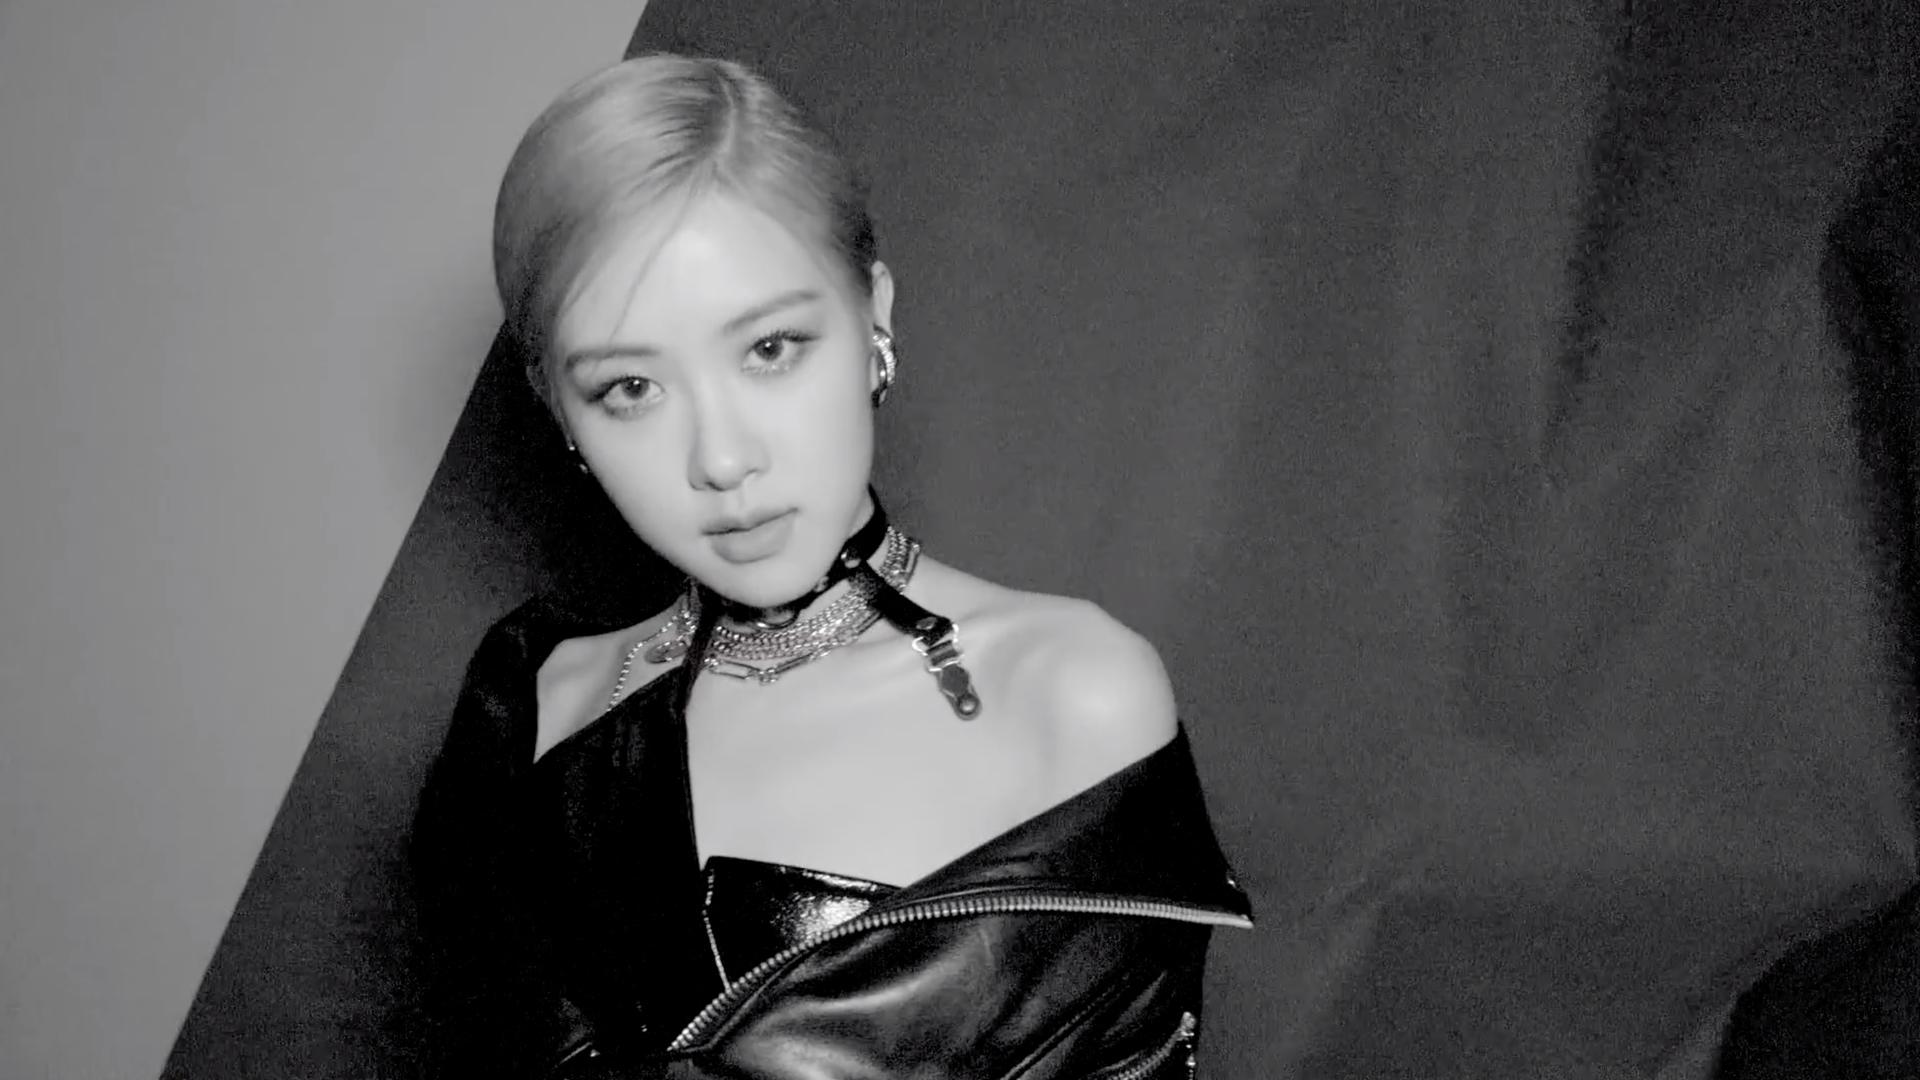 BLACKPINK Share Rosé and Jisoo's Teaser Videos For “KILL THIS LOVE